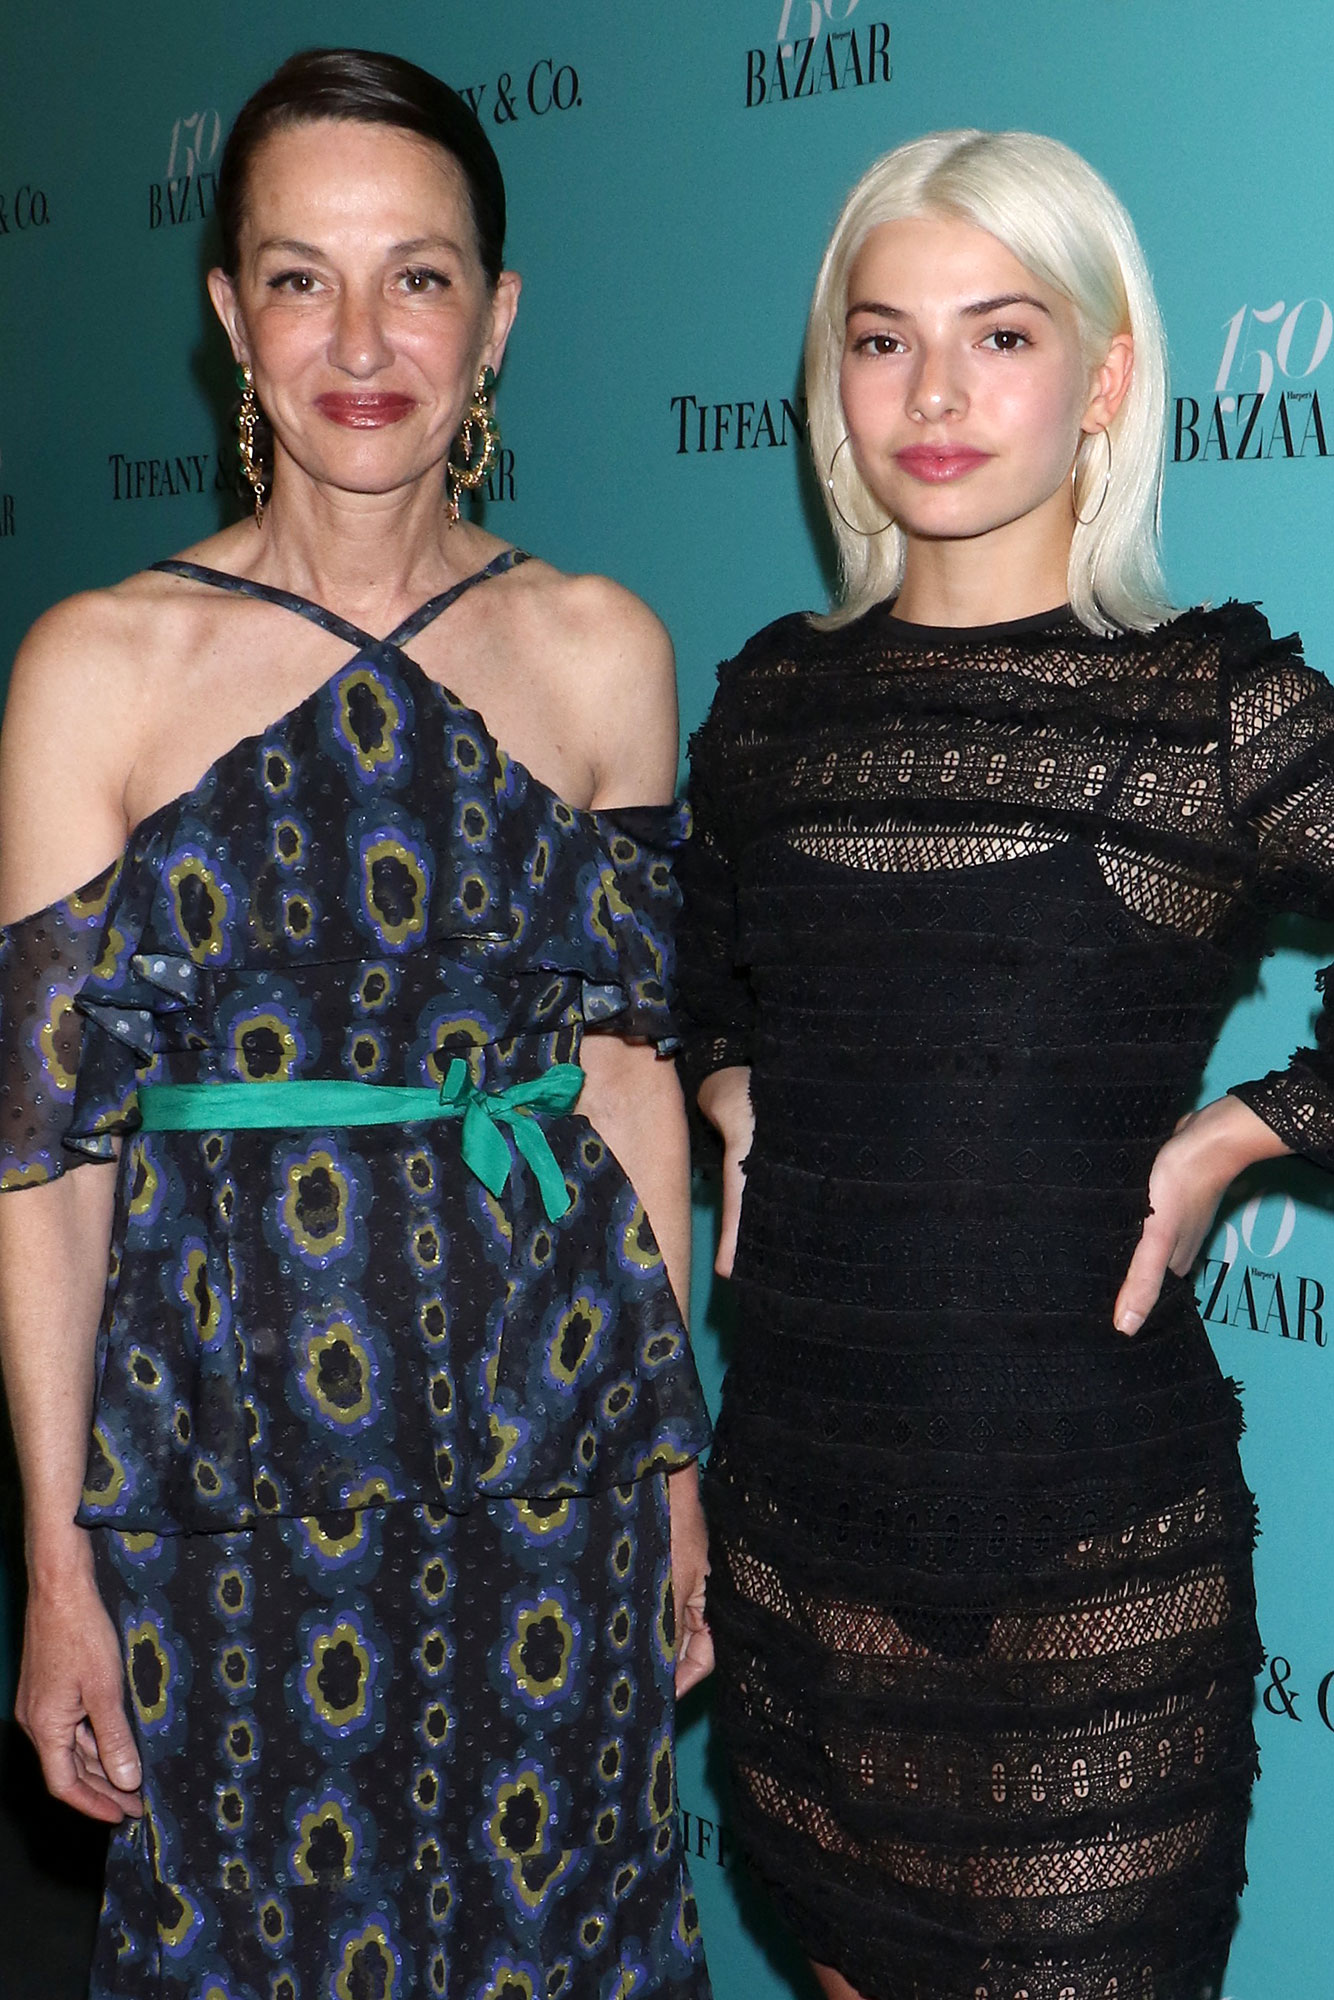 https://www.usmagazine.com/wp-content/uploads/2021/02/Who-Is-Kit-Keenan-5-Things-to-Know-About-Cynthia-Rowley-Daughter.jpg?quality=40&strip=all